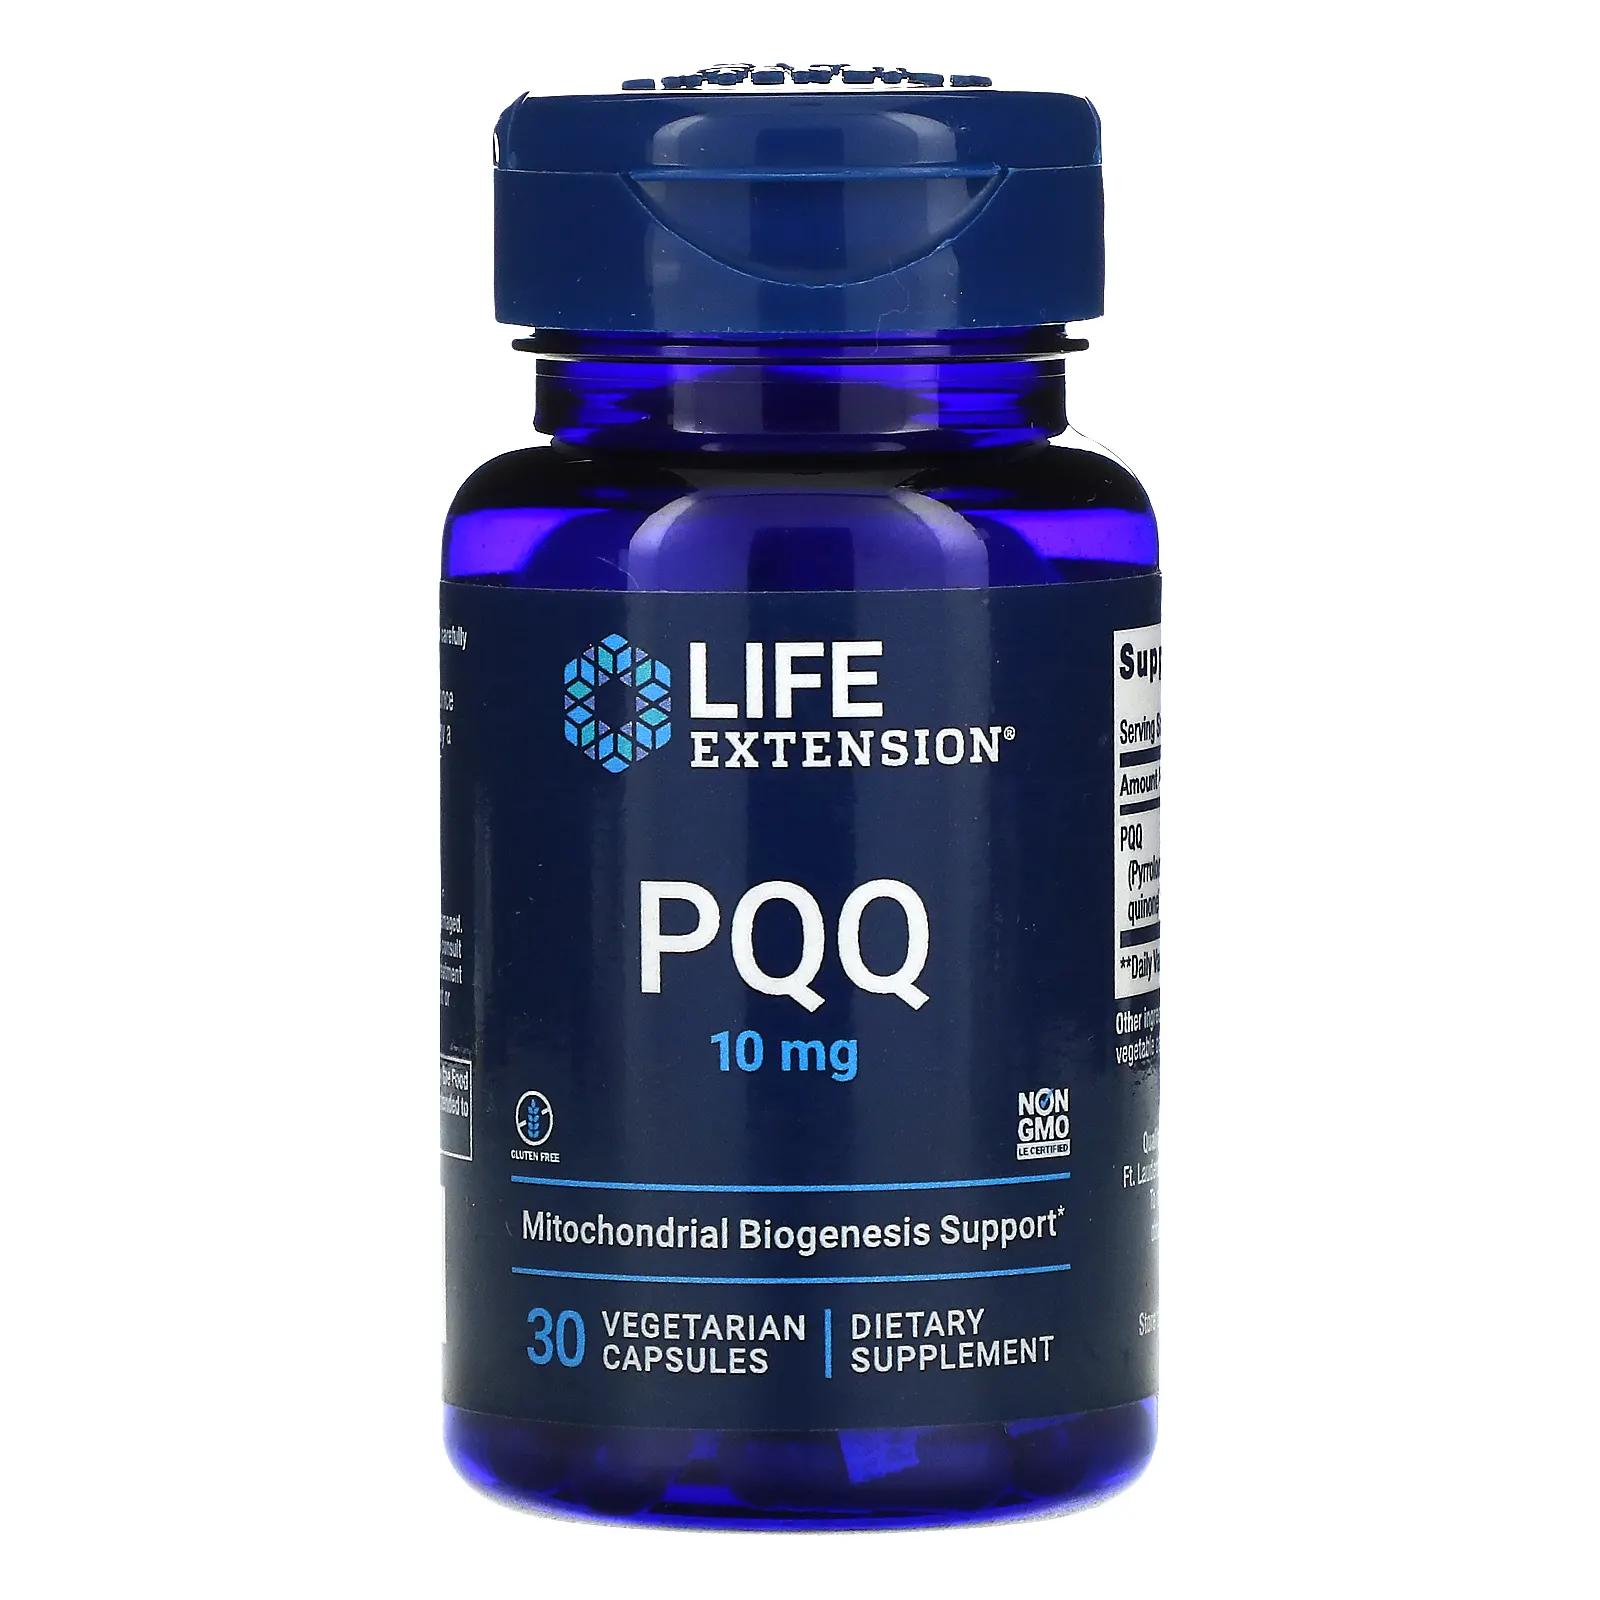 life extension optimized quercetin 250 mg 60 vegetarian capsules Life Extension PQQ Caps 10 mg 30 Vegetarian Capsules